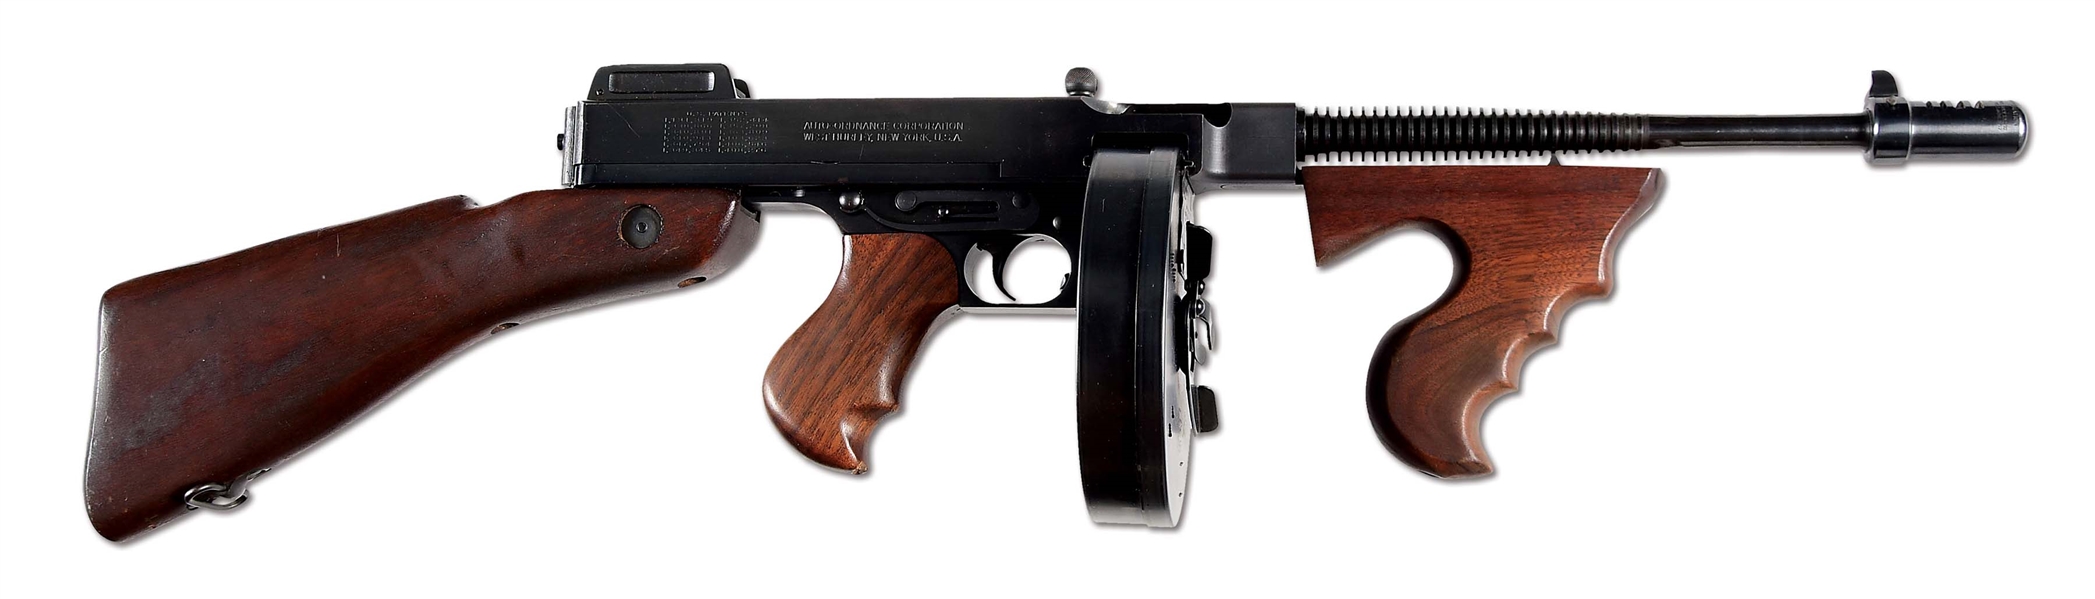 (N) ATTRACTIVE AND WELL ACCESSORIZED AUTO ORDNANCE WEST HURLEY THOMPSON MODEL 1928 MACHINE GUN (CURIO AND RELIC).